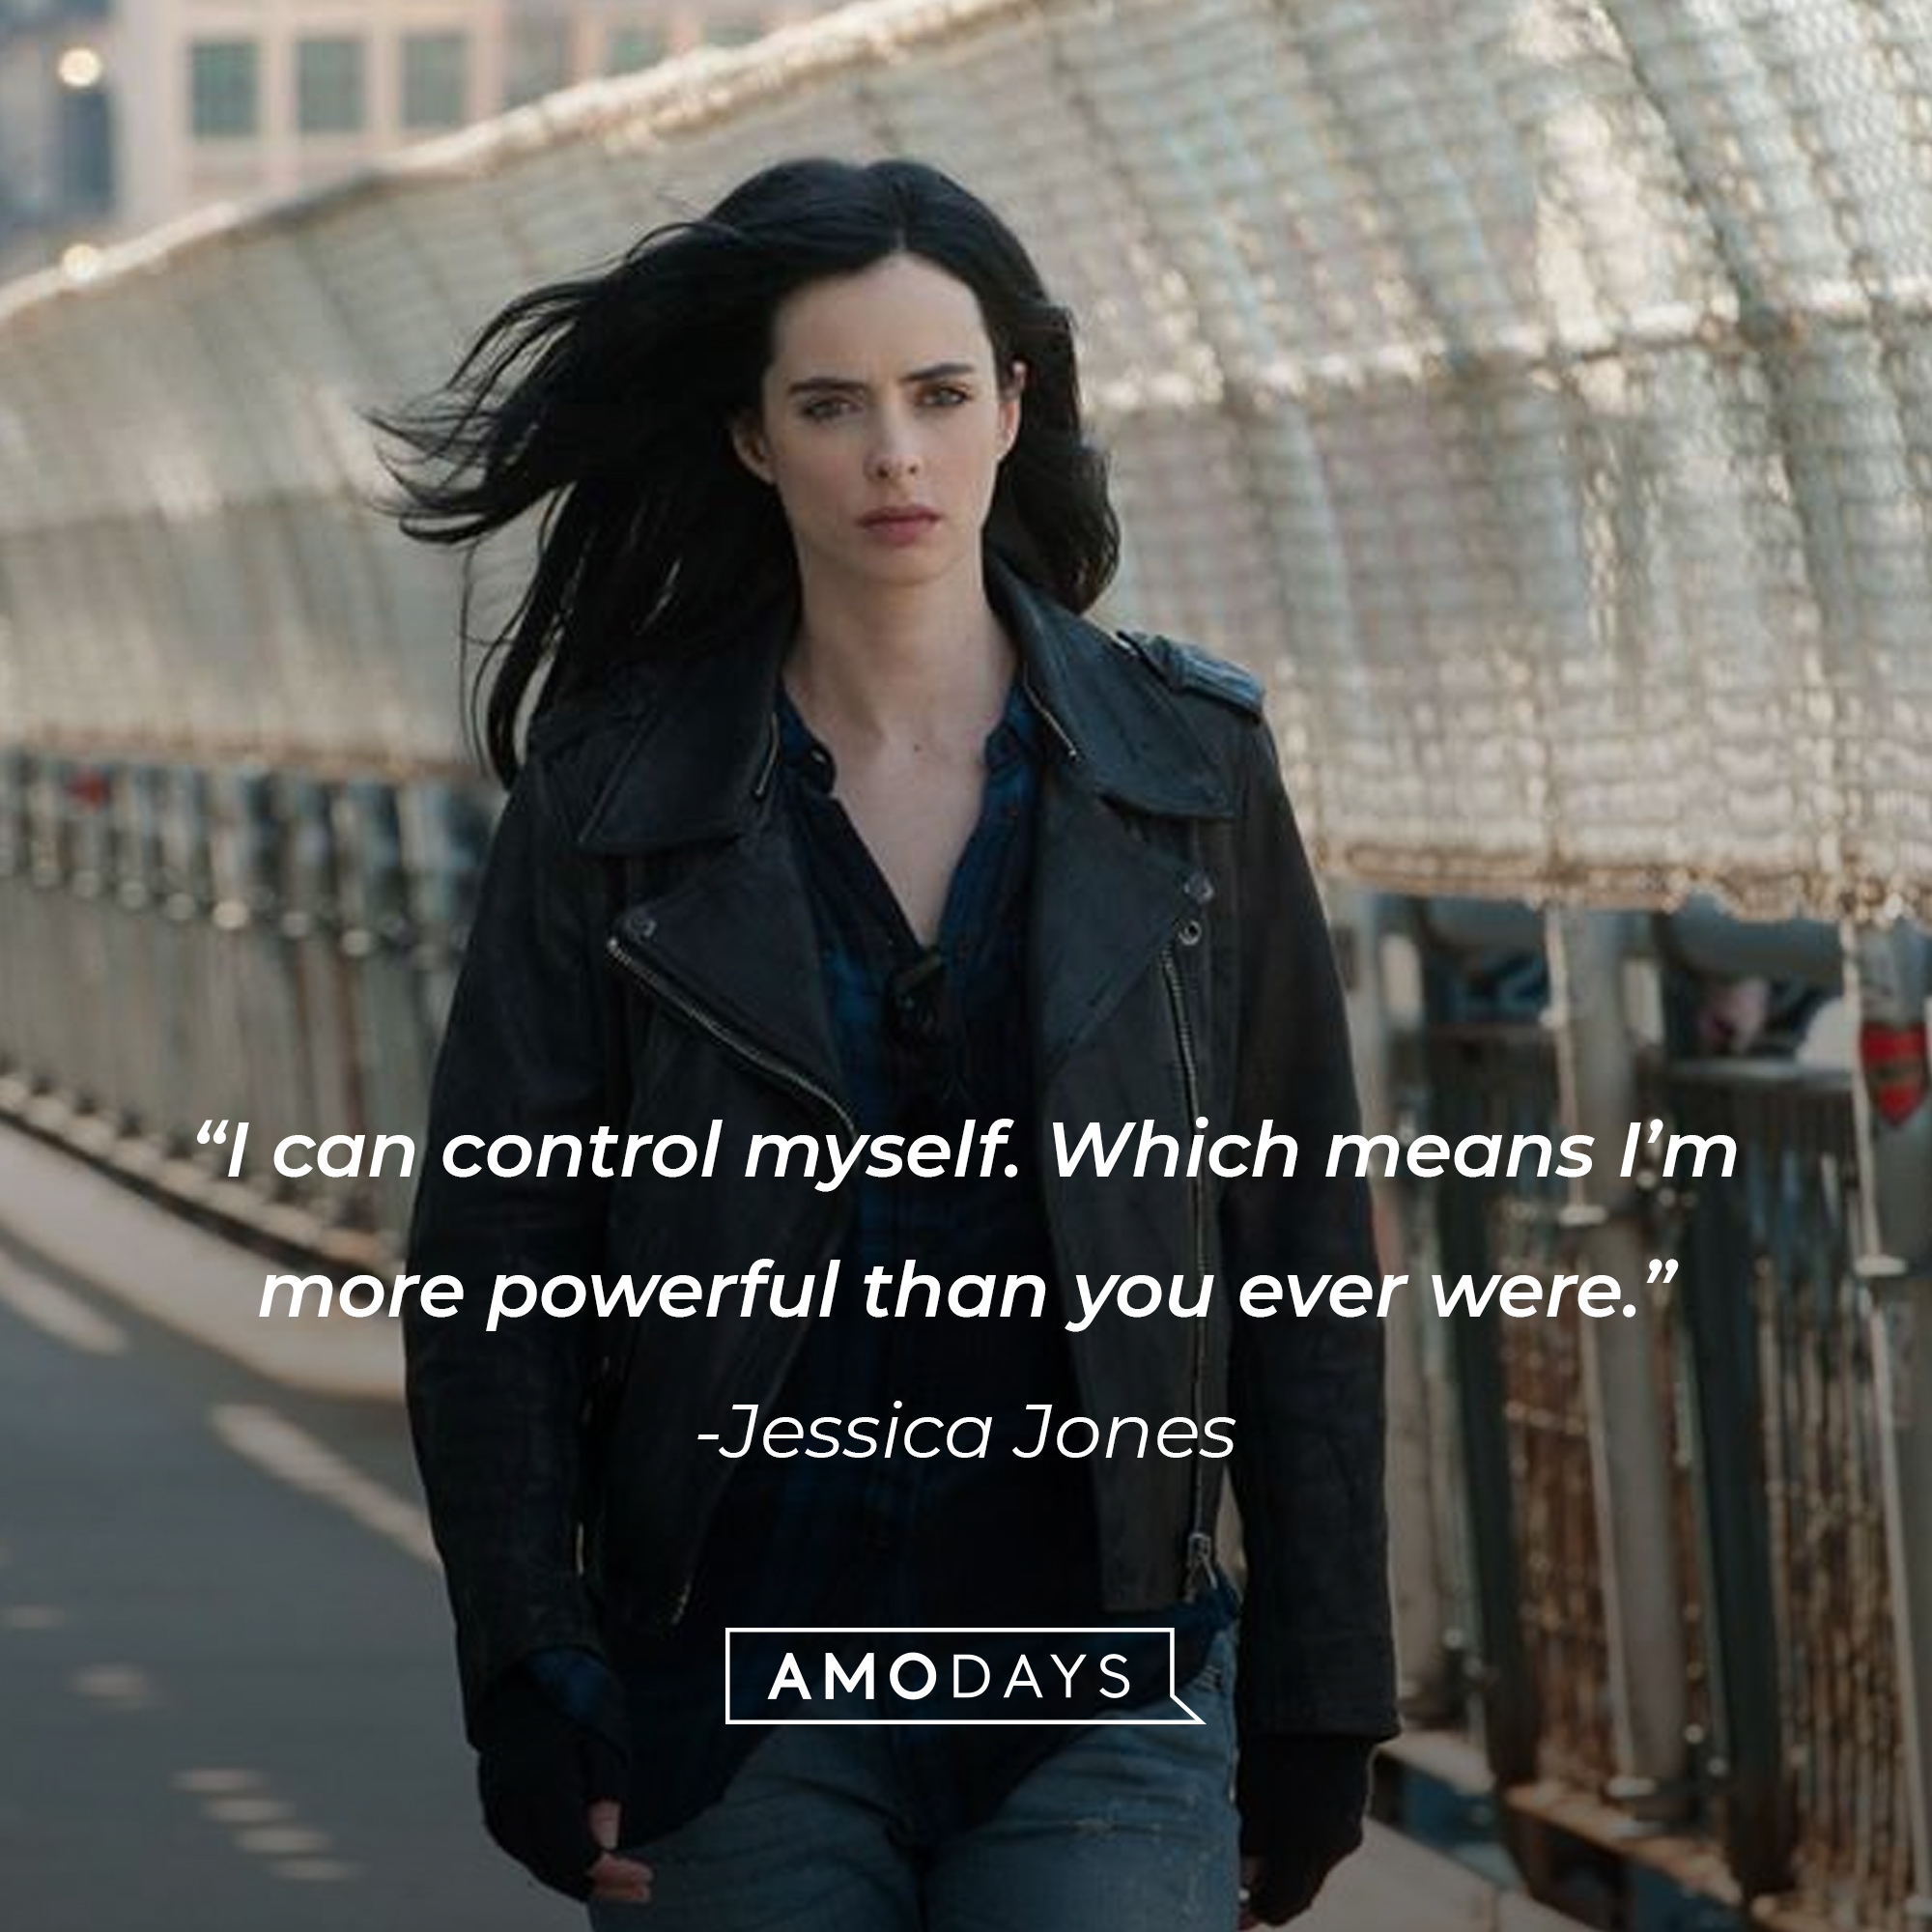 An image of Jessica Jones with her quote: “I can control myself. Which means I’m more powerful than you ever were.”┃Source:facebook.com/JessicaJonesLat